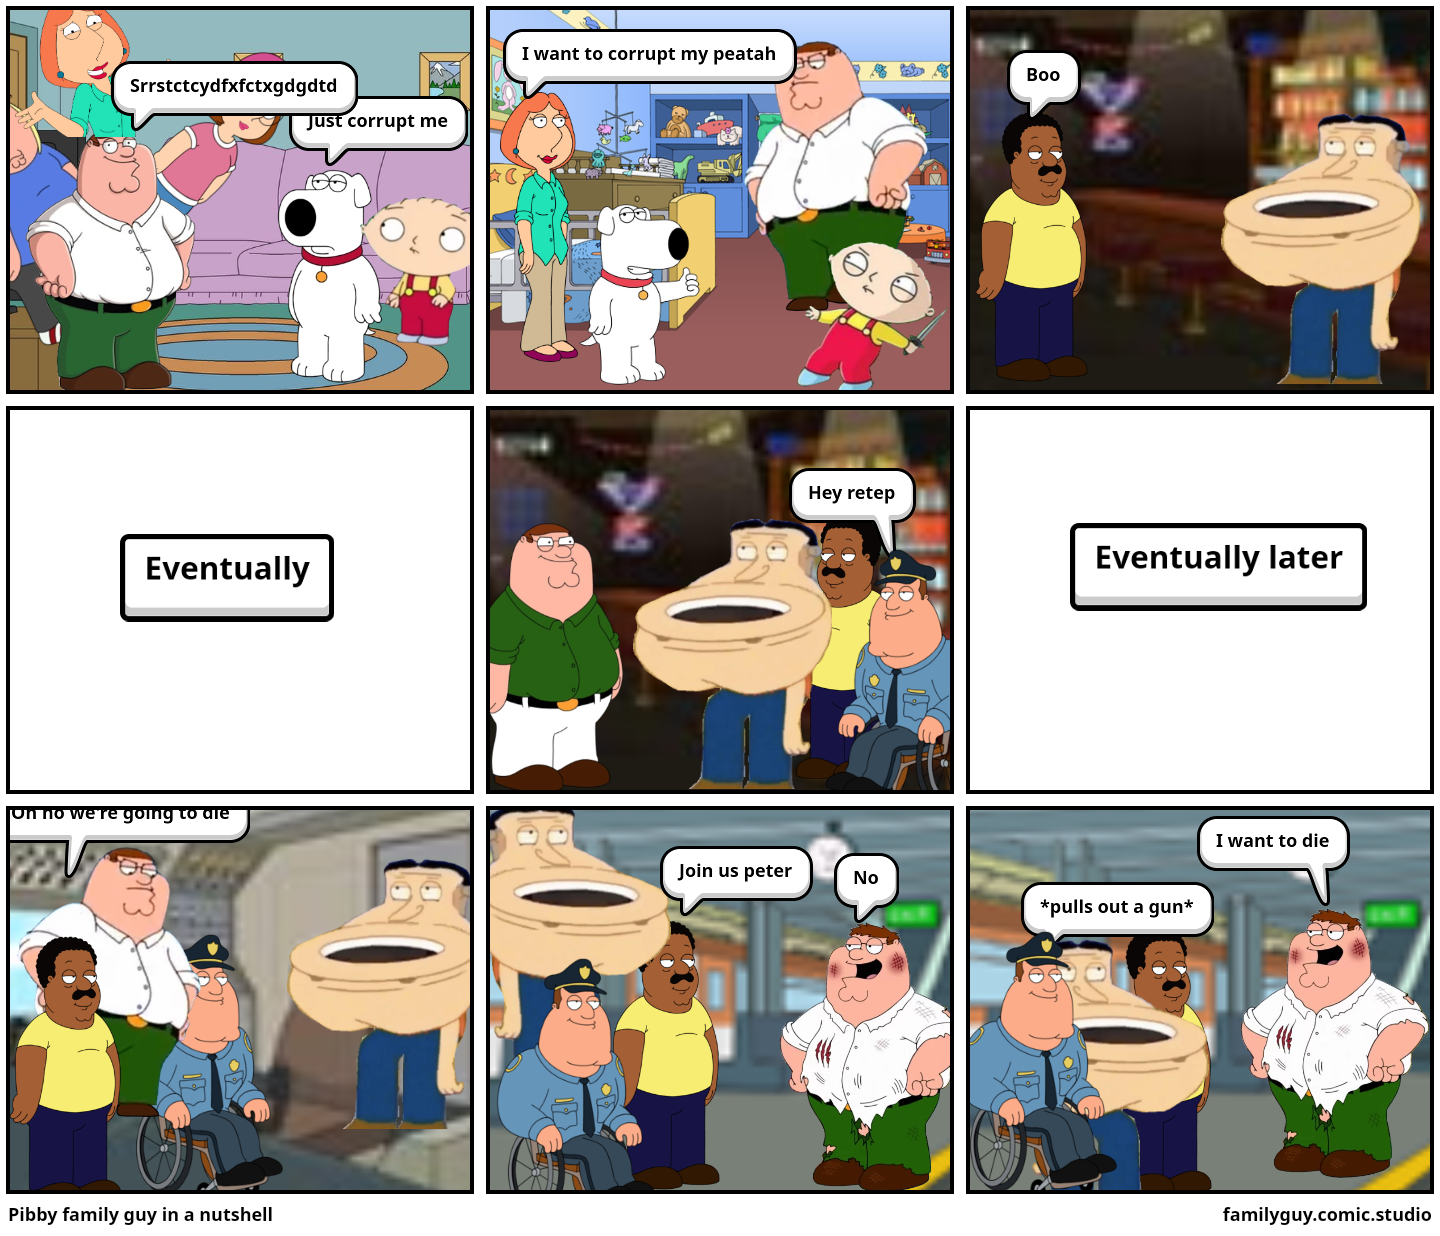 Pibby family guy in a nutshell - Comic Studio